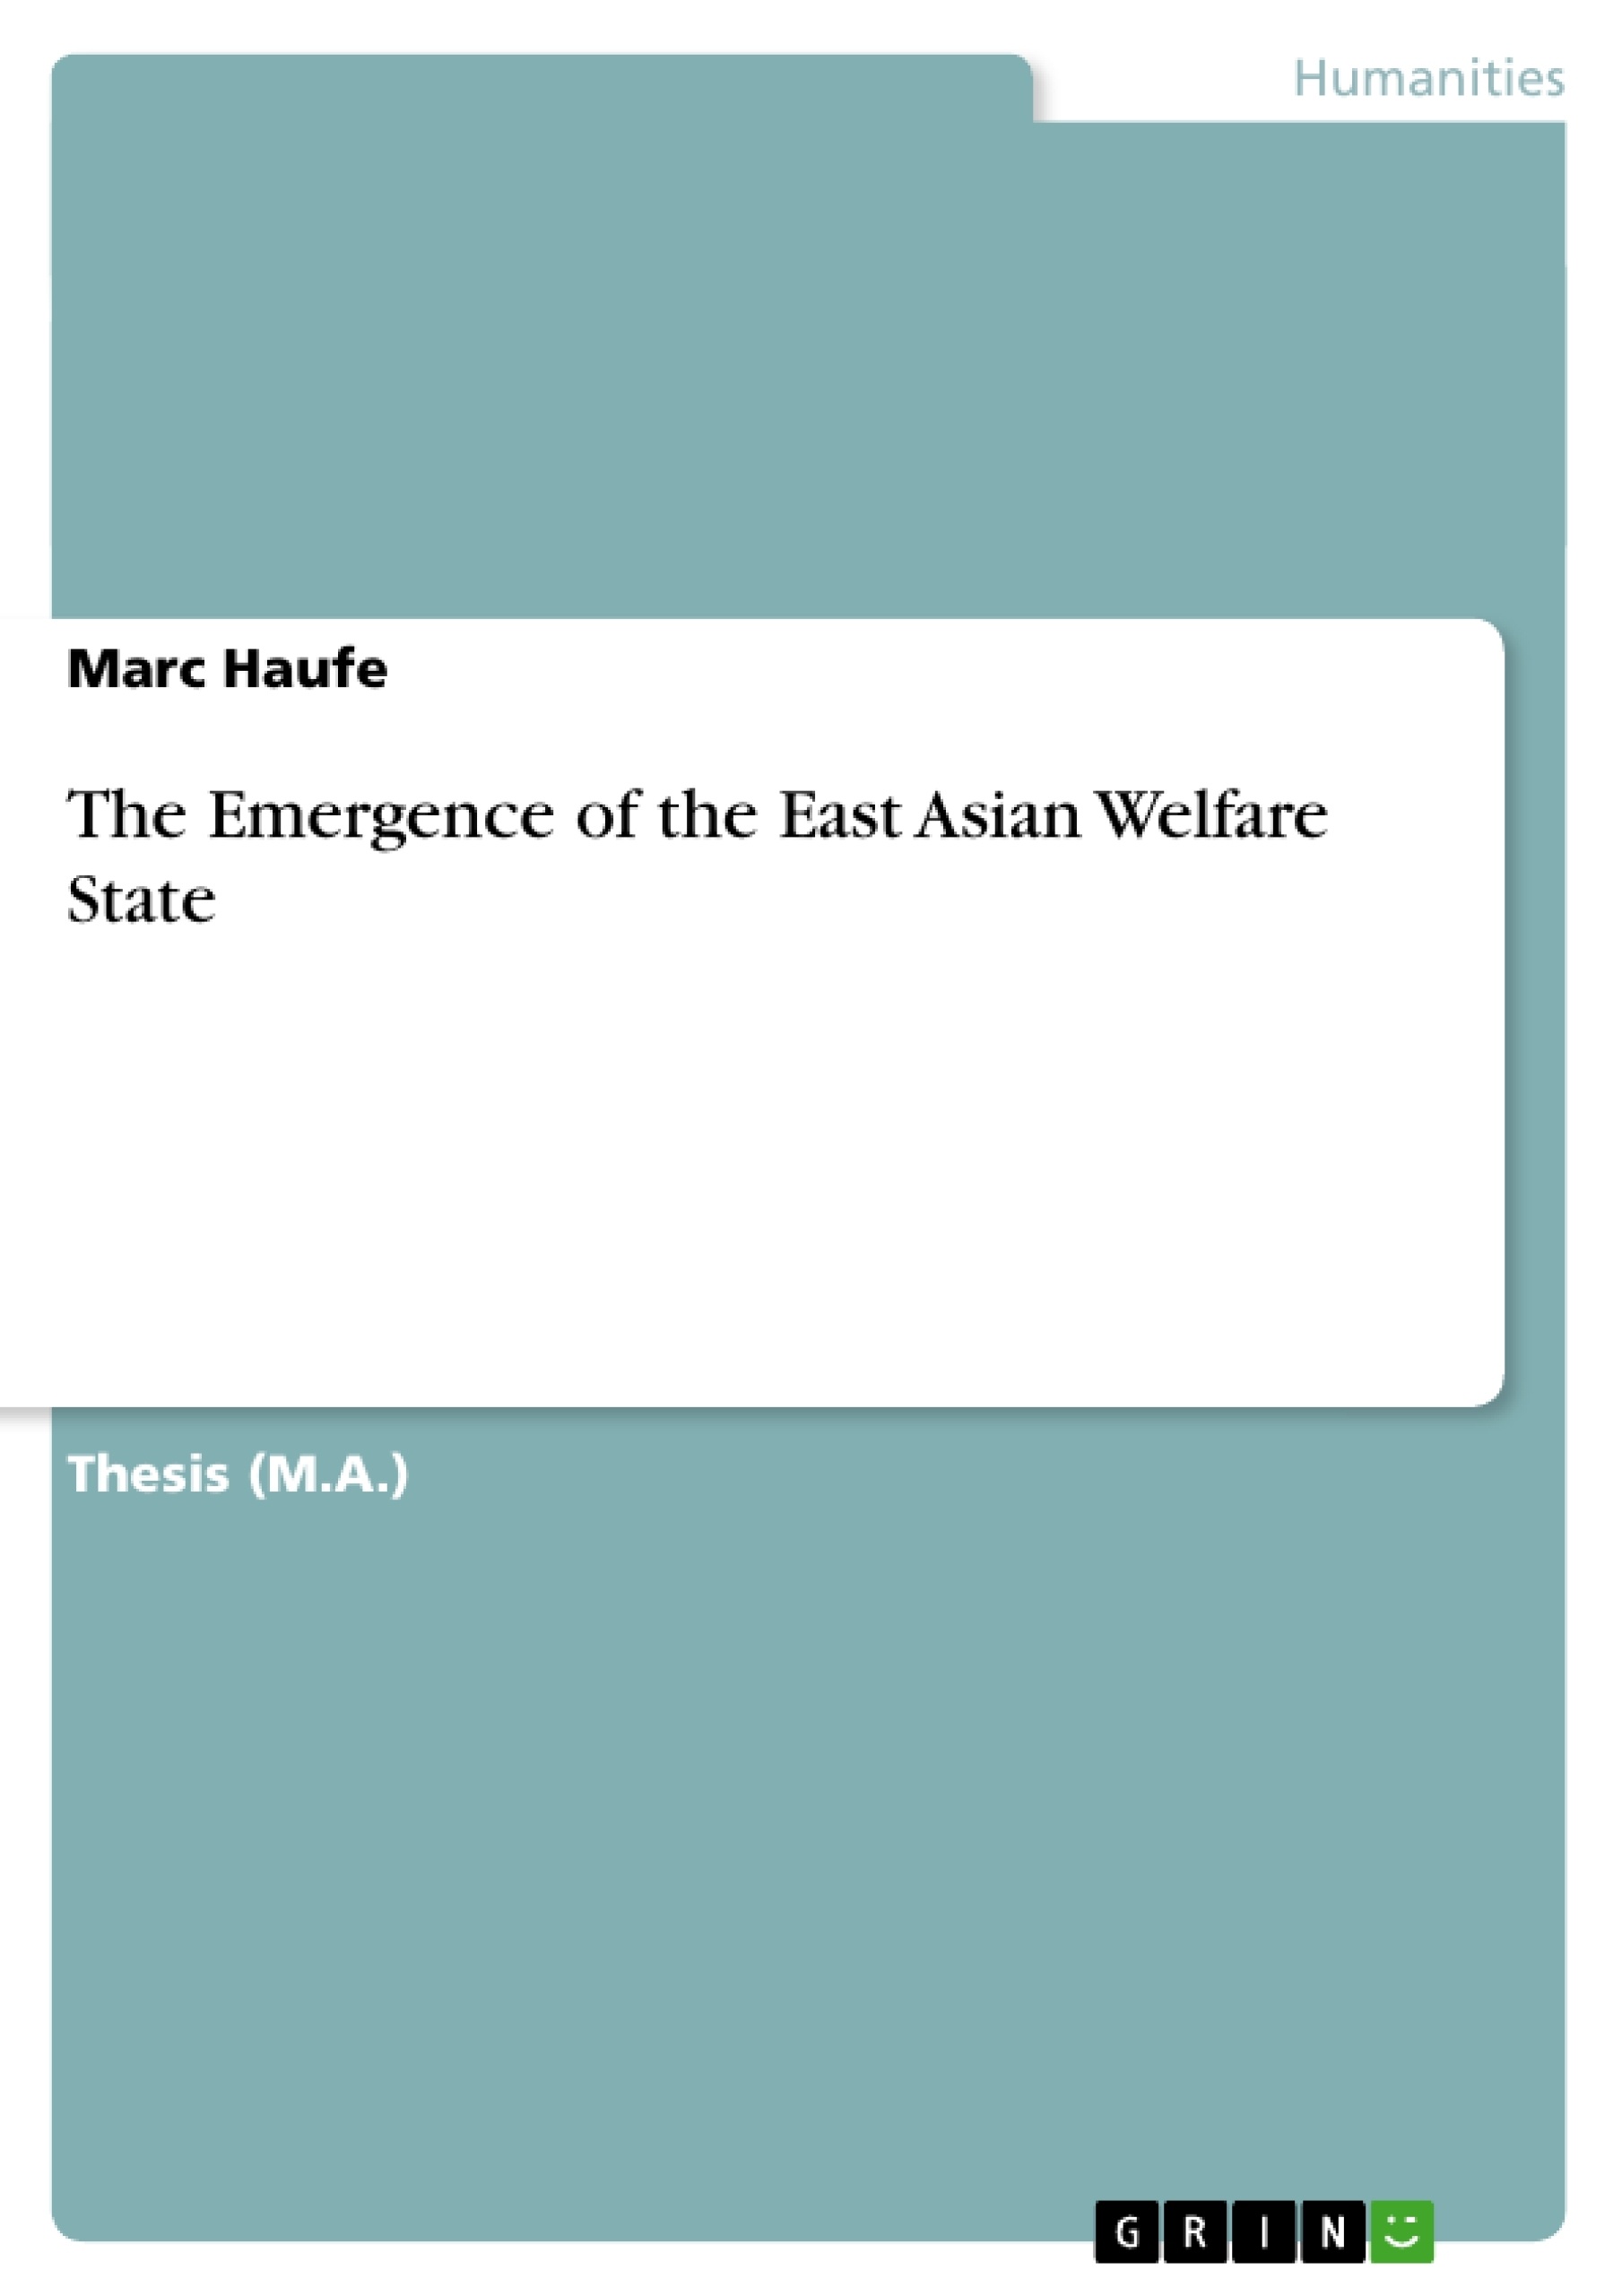 Título: The Emergence of the East Asian Welfare State